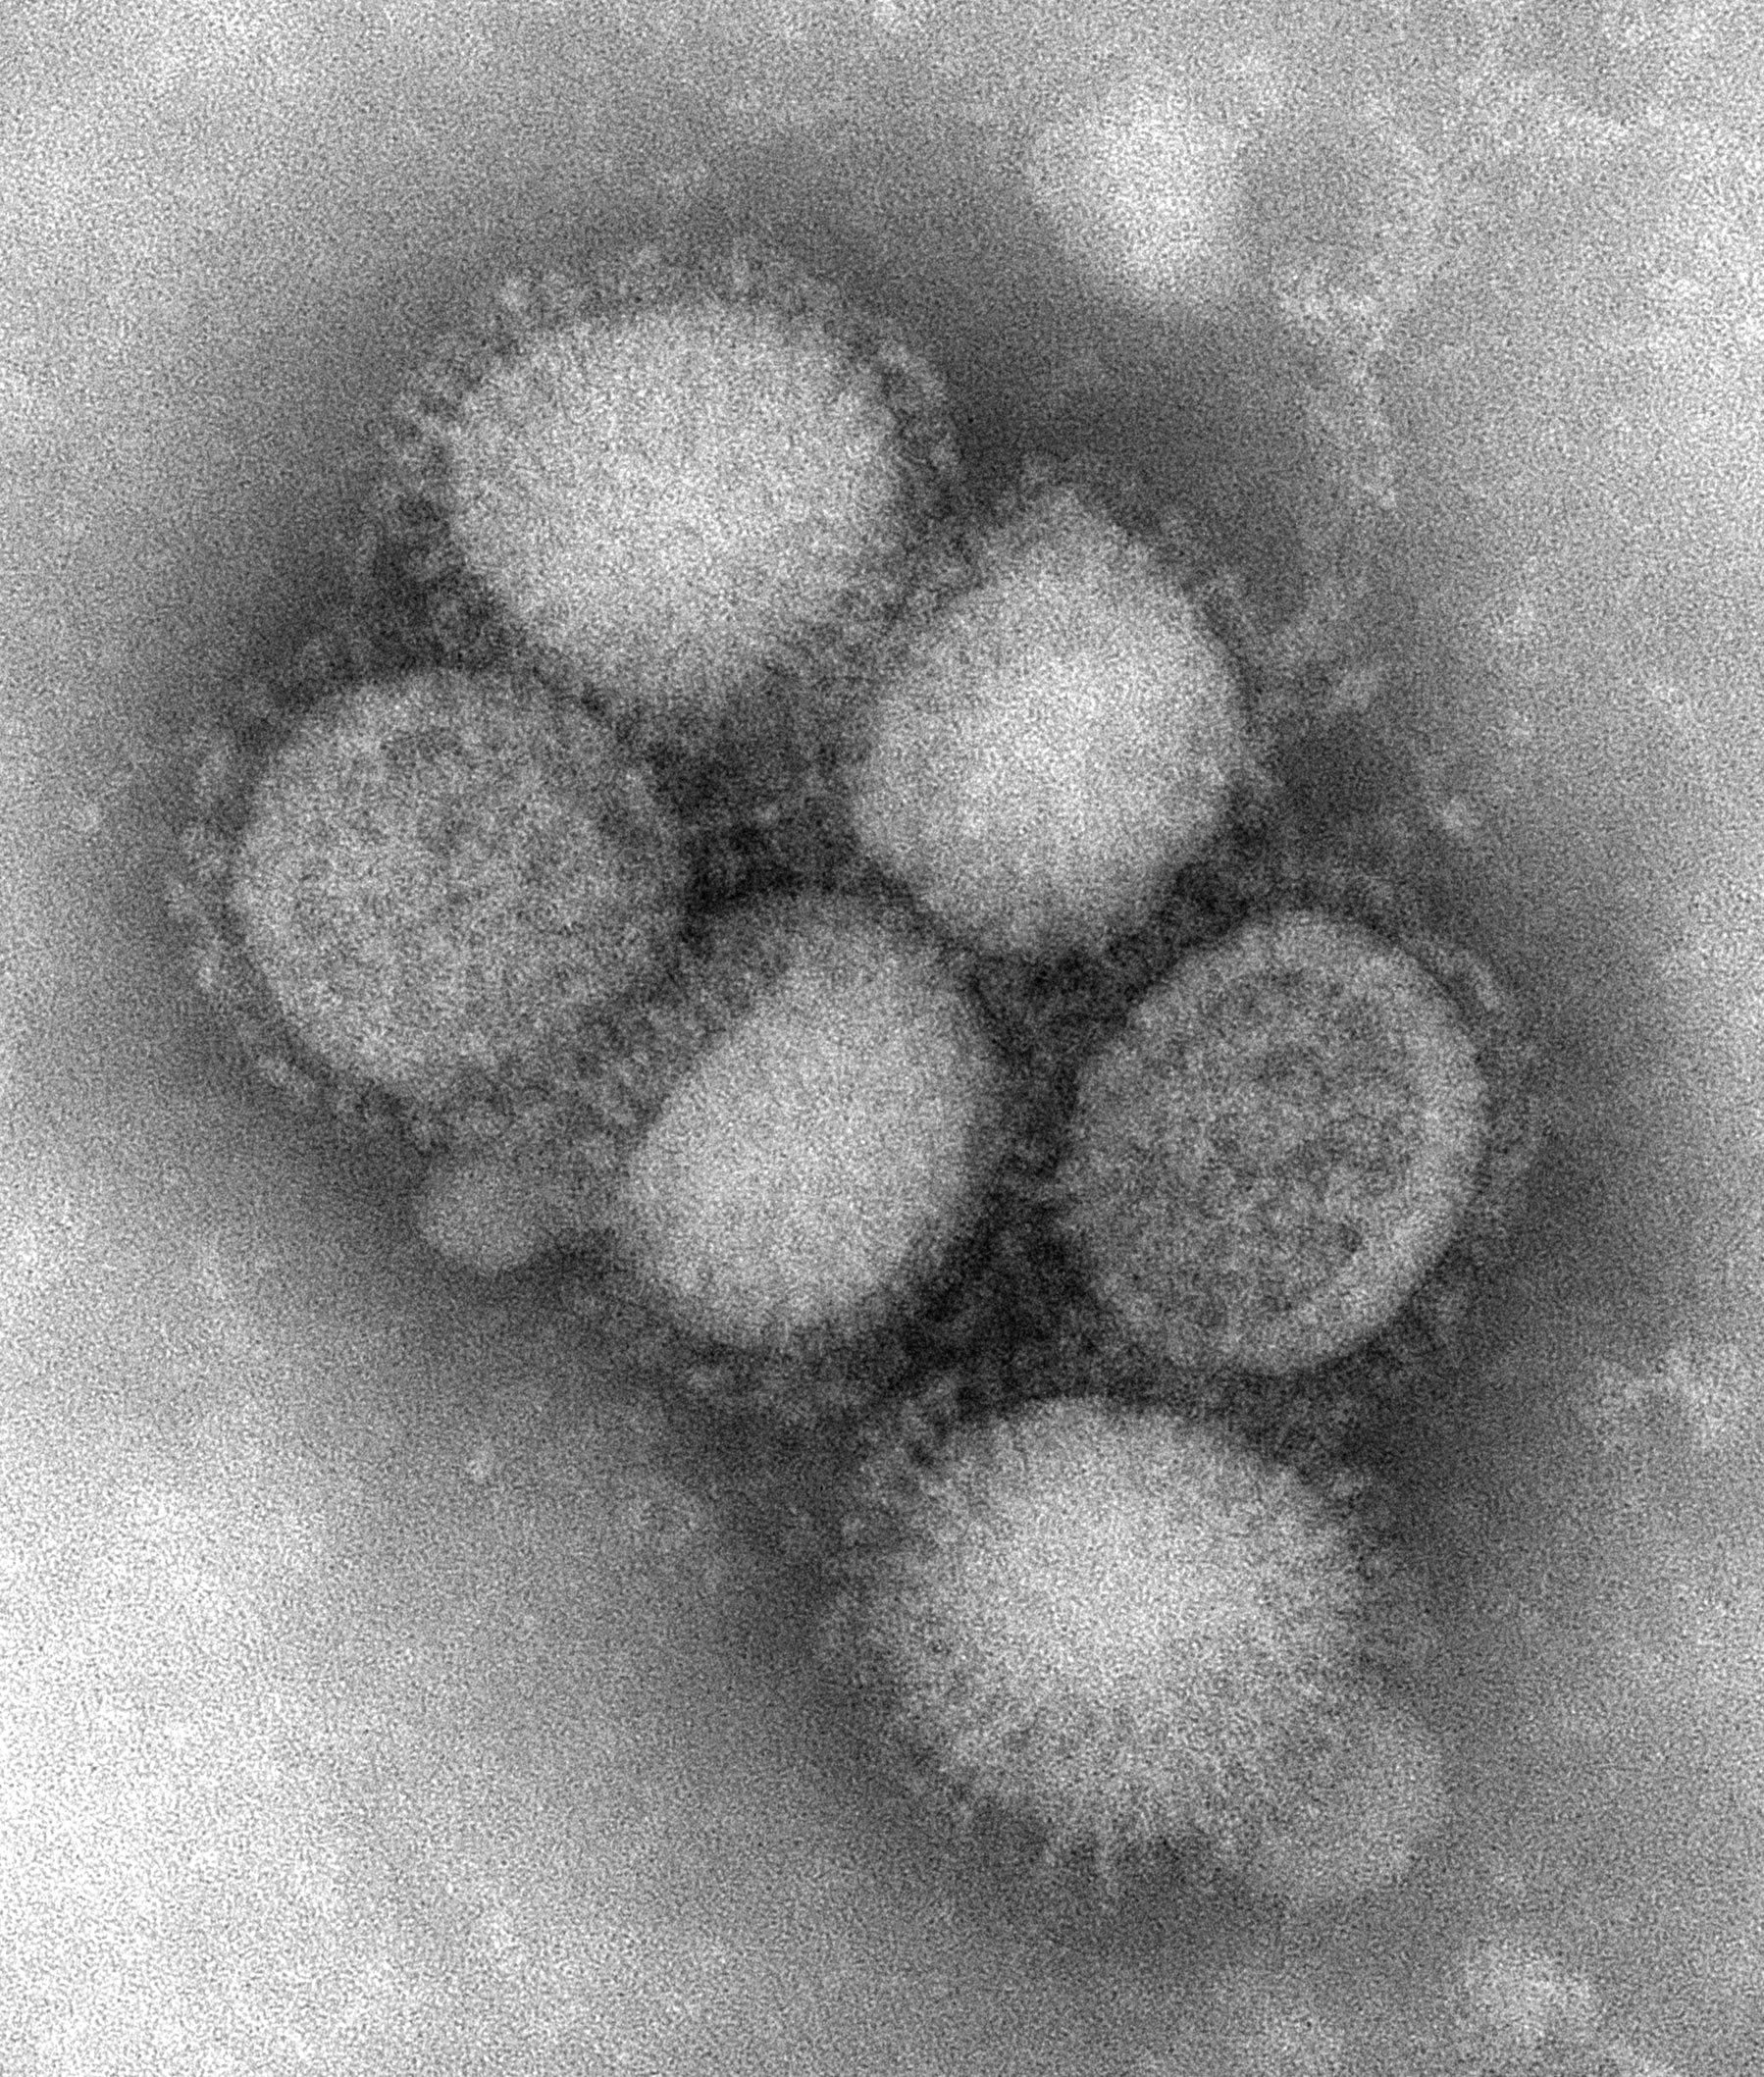 Electron micrograph showing several particles of the H1N1 influenza virus. Each particle measures about 100nm in diameter.